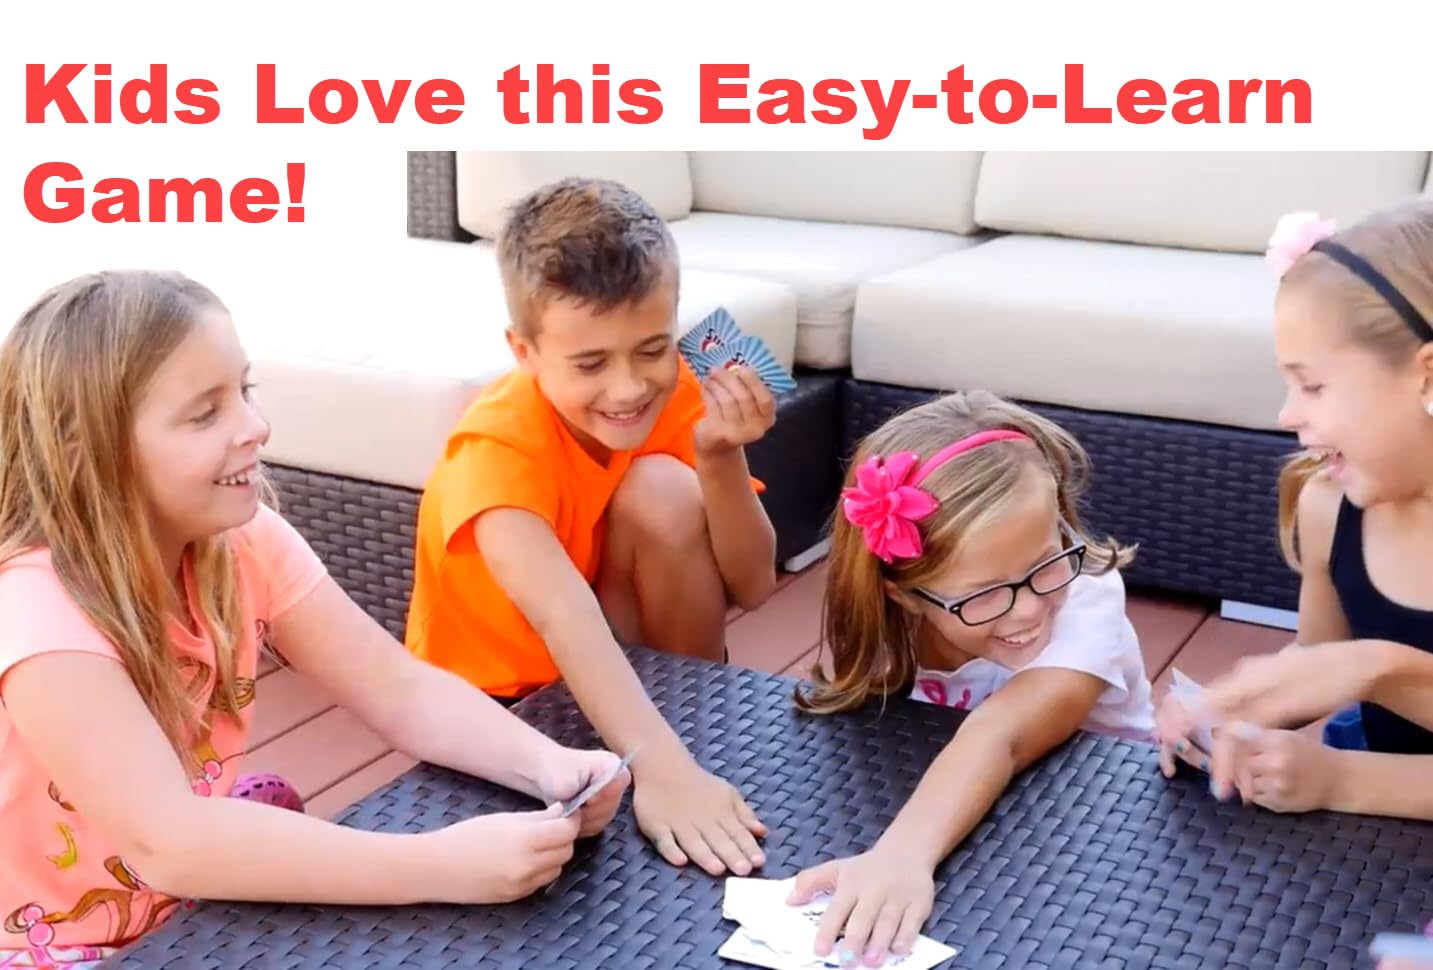 Arizona GameCo Smack it! Card Game for Kids & Families – Fun and Easy to Learn for Boy or Girl Ages 6-12